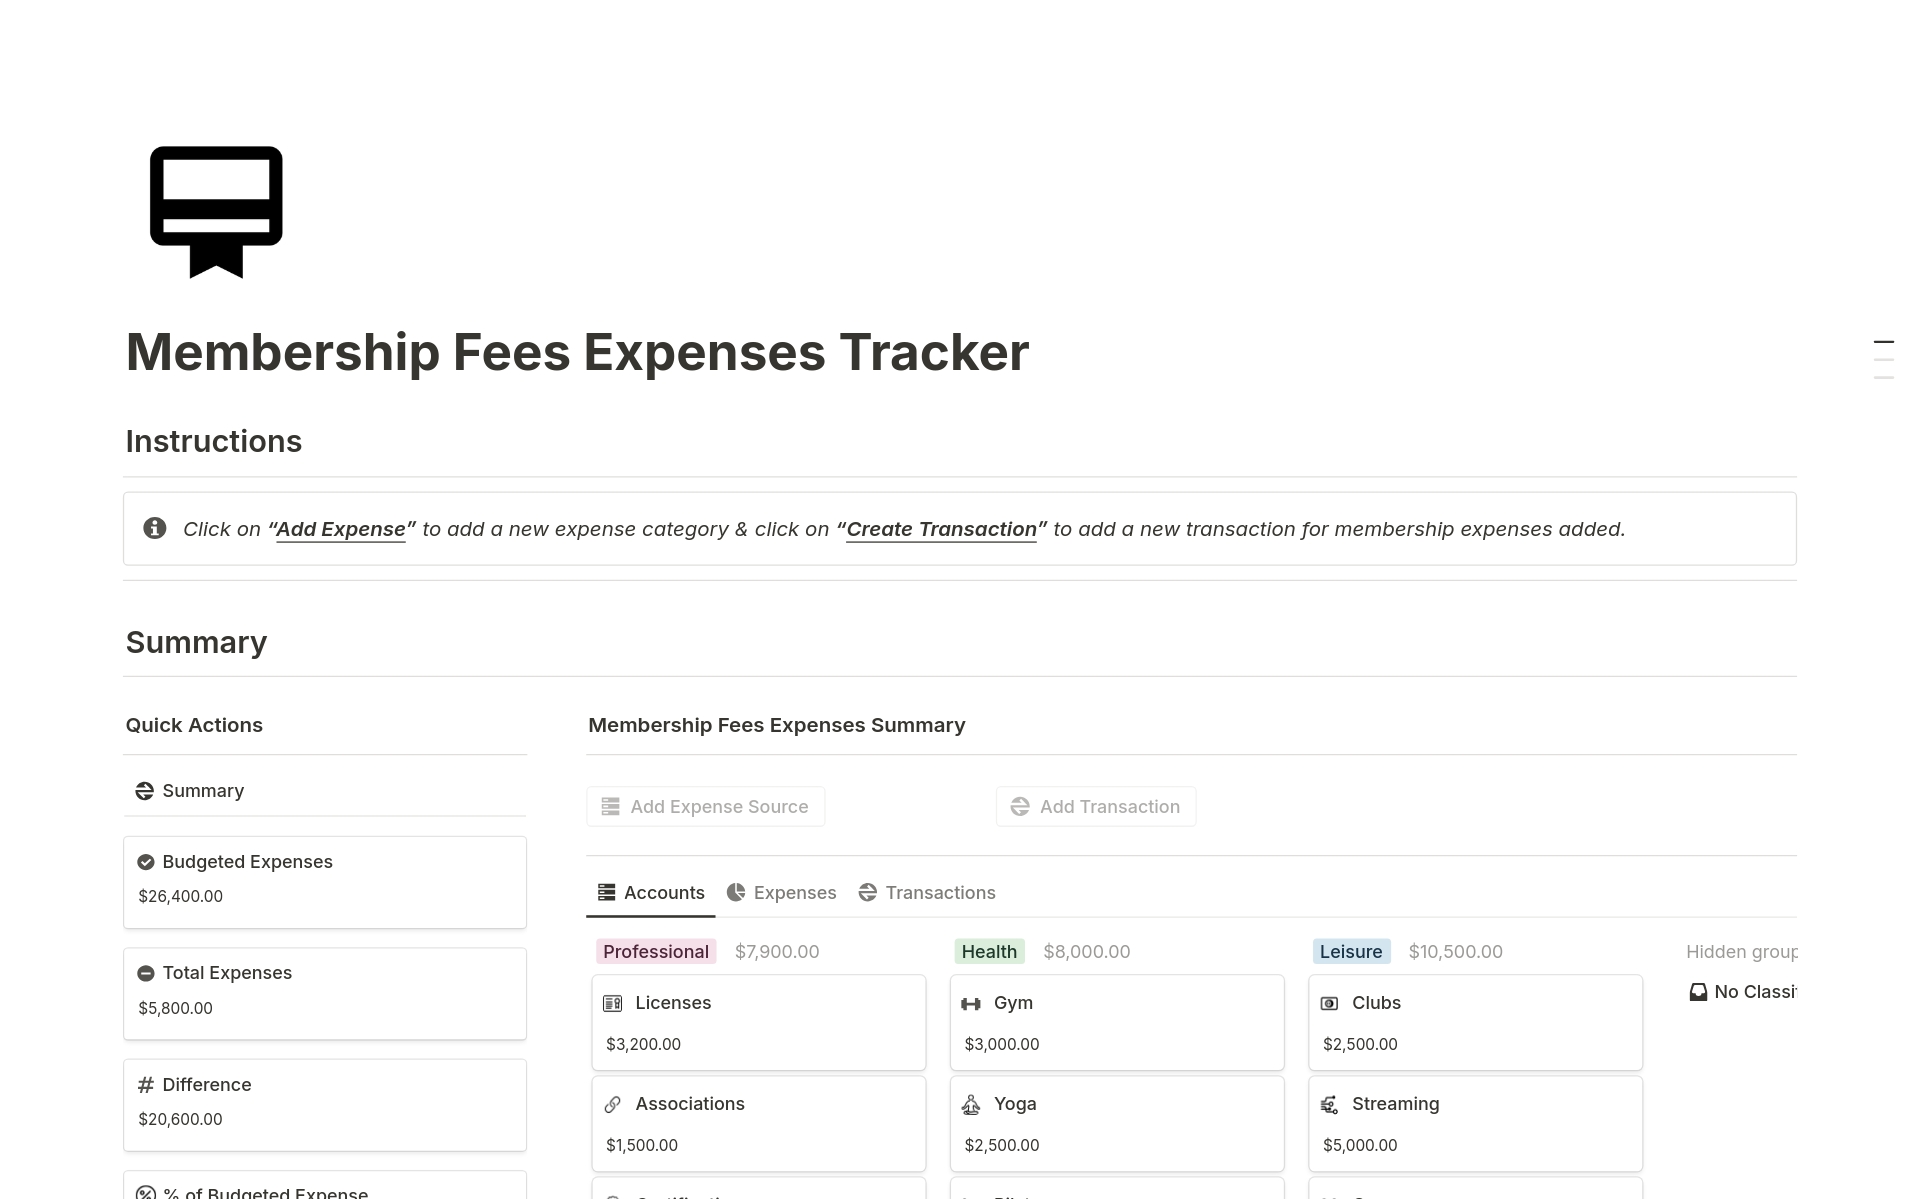 Ideal for those who are looking to manage the license and membership expenses of their business, this tracker helps you keep track of membership expenses such as professional, health, leisure expenses and much more.